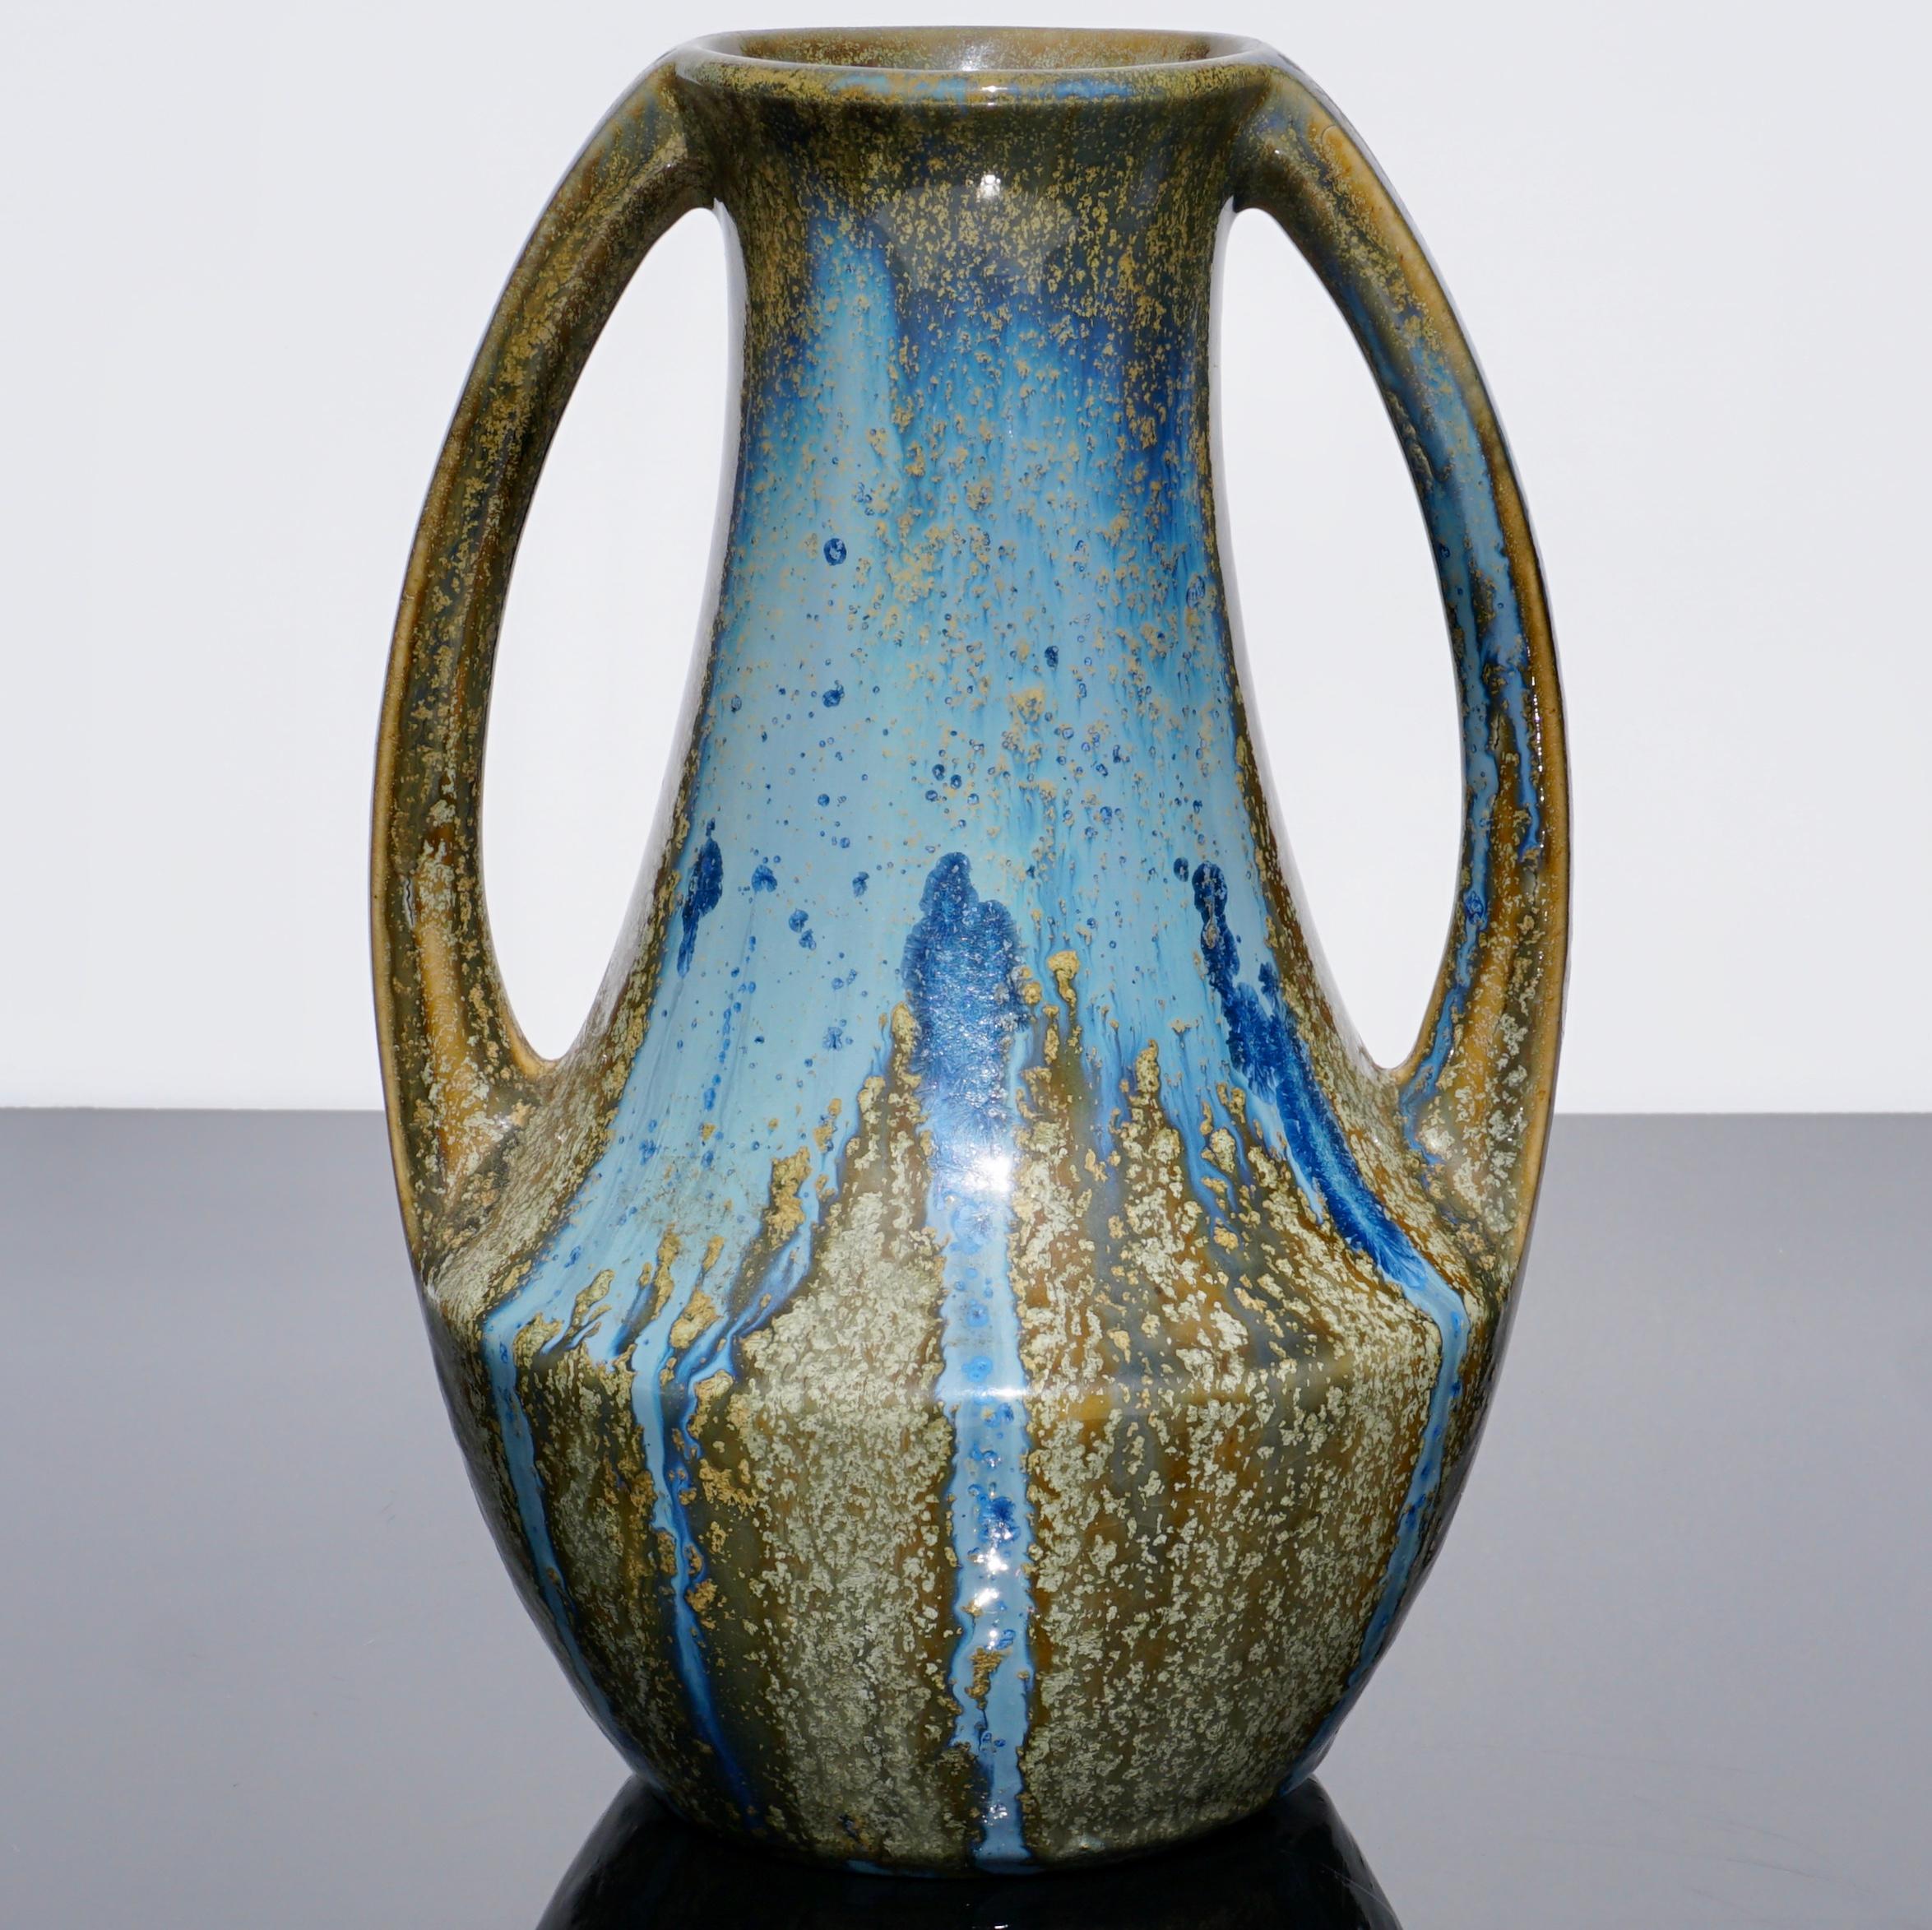 A Pierrefonds (France) Art Nouveau vase with Amphora form and two elegant handles. Glazed with beautiful crystalline star-bursts of light and dark blue on a glistening beige background. Excellent condition!

Measures: Height 9 inches (23